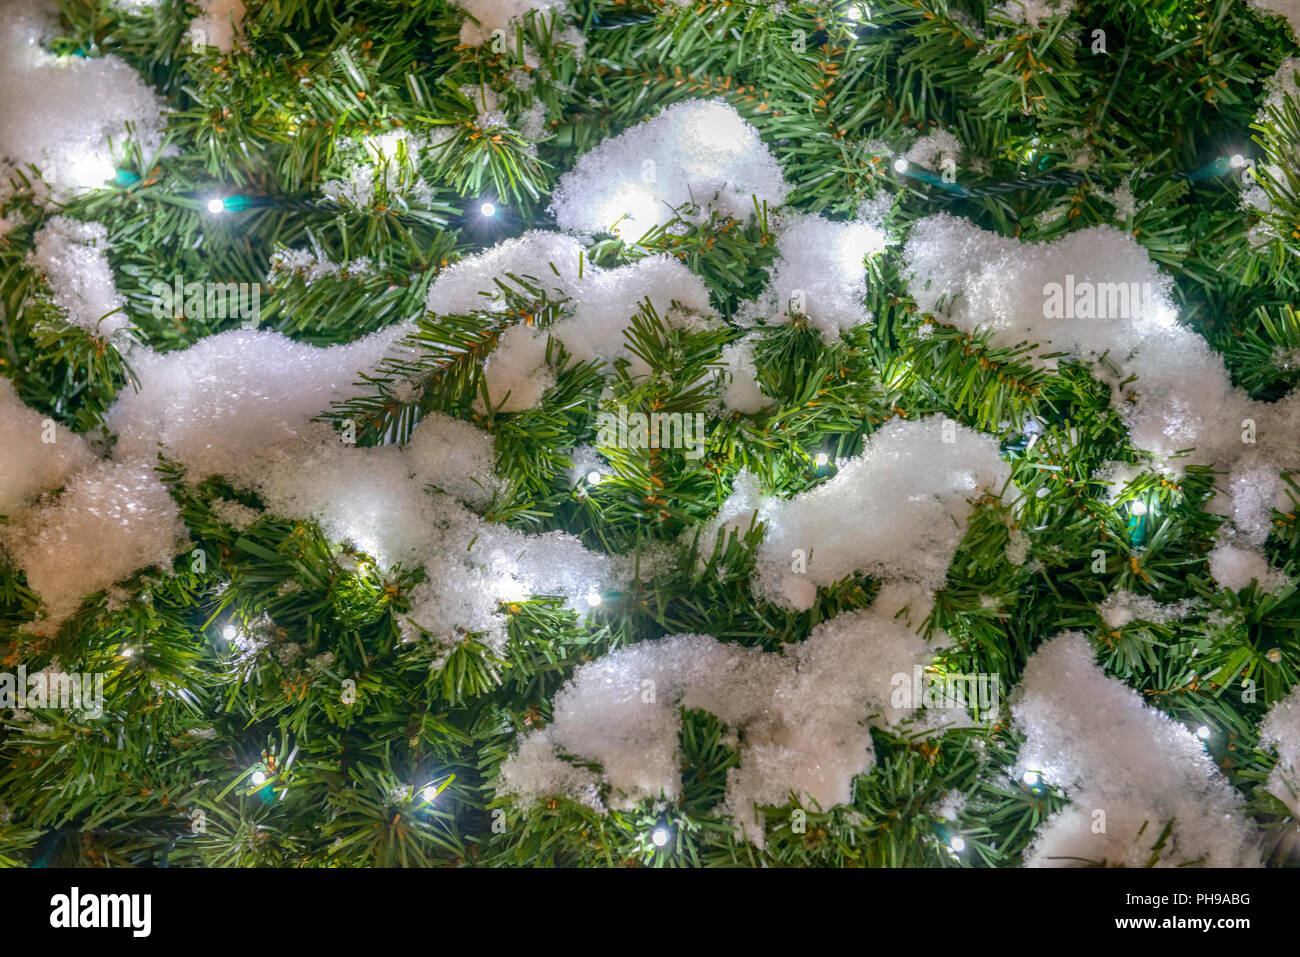 Spruce with snow and garland lights Stock Photo